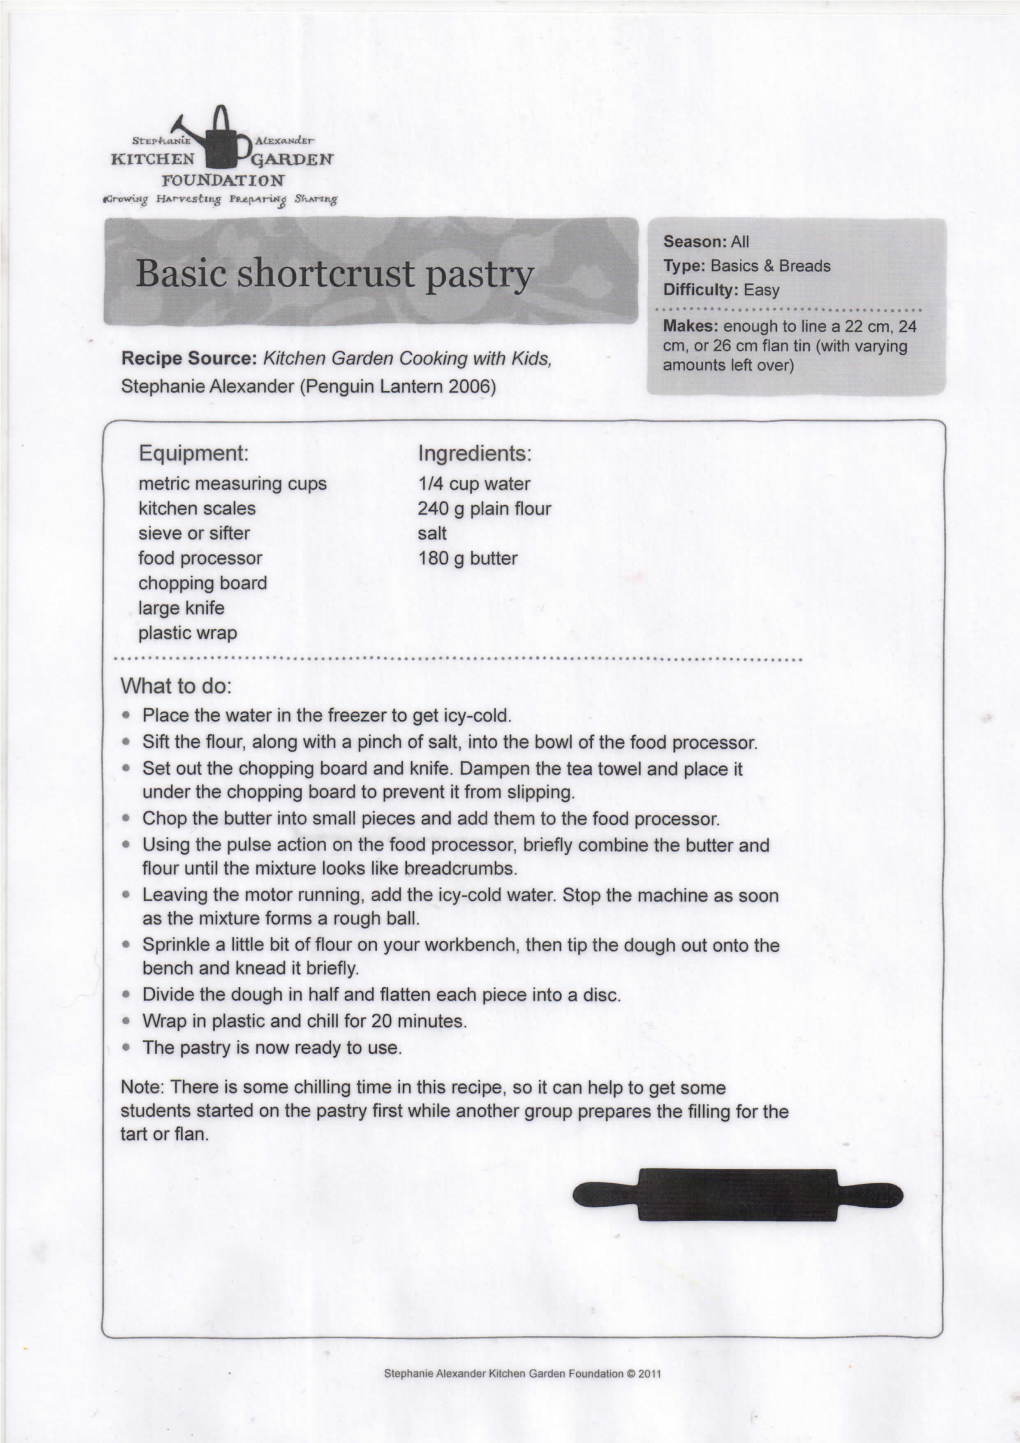 Basic Shortcrust Pastry Difficulty: Easy